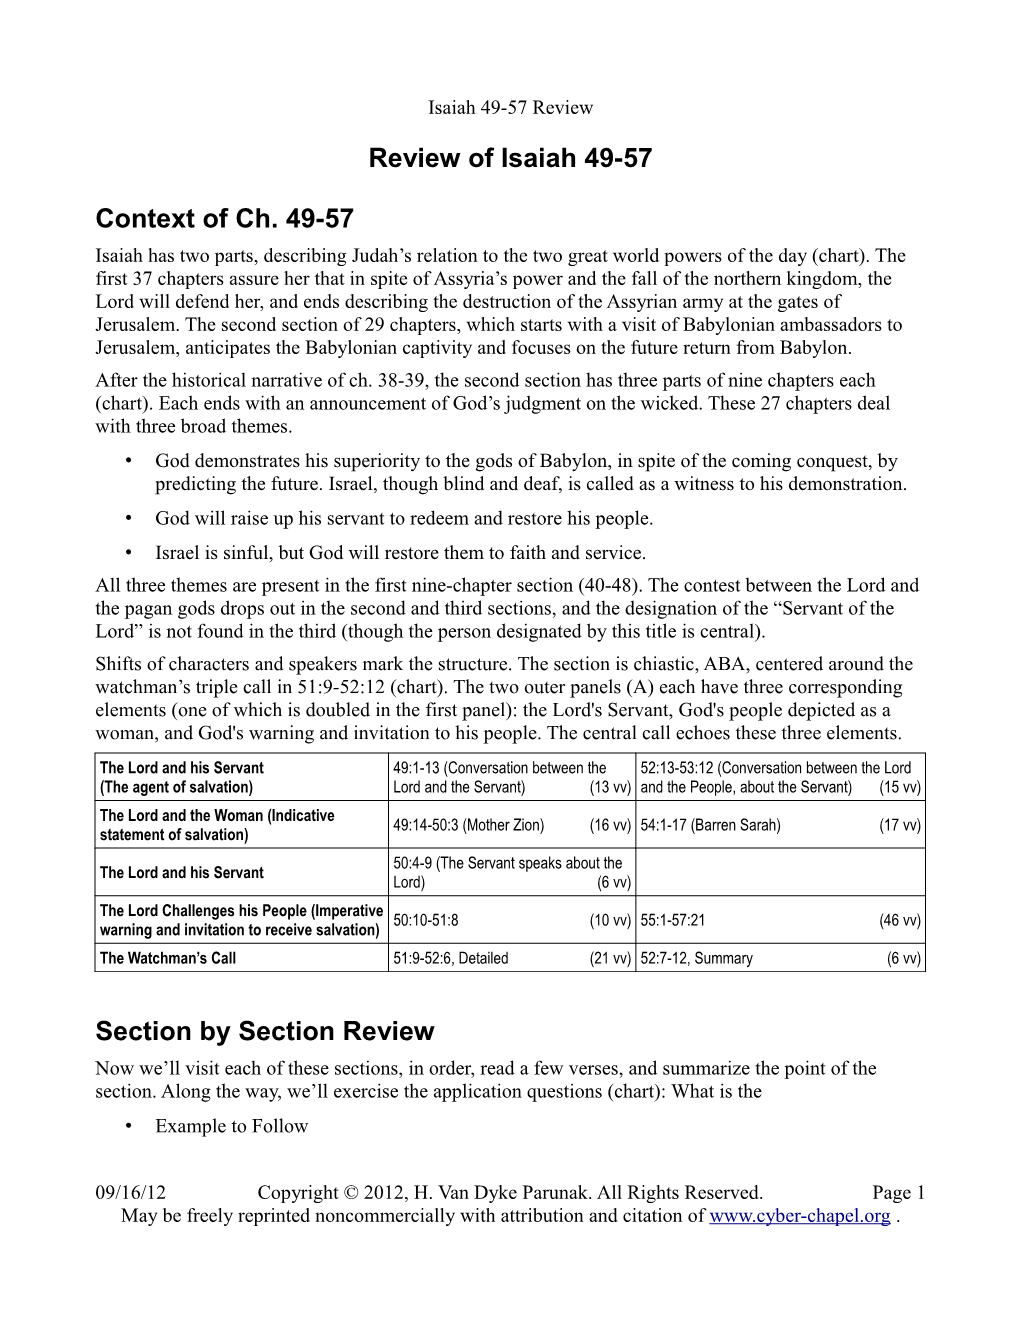 Review of Isaiah 49-57 Context of Ch. 49-57 Section By